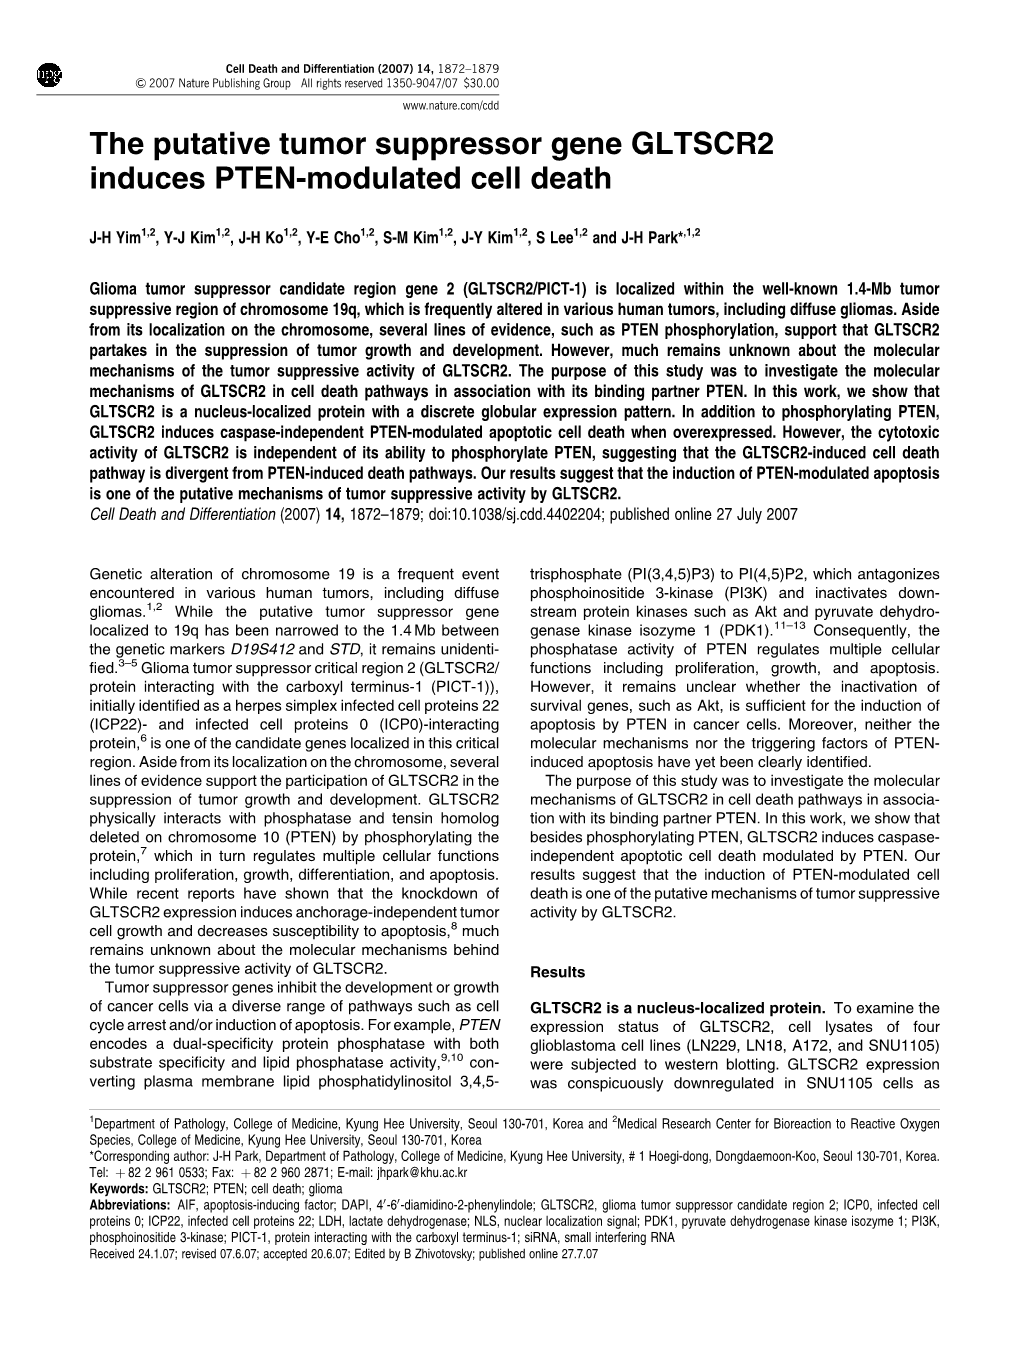 The Putative Tumor Suppressor Gene GLTSCR2 Induces PTEN-Modulated Cell Death